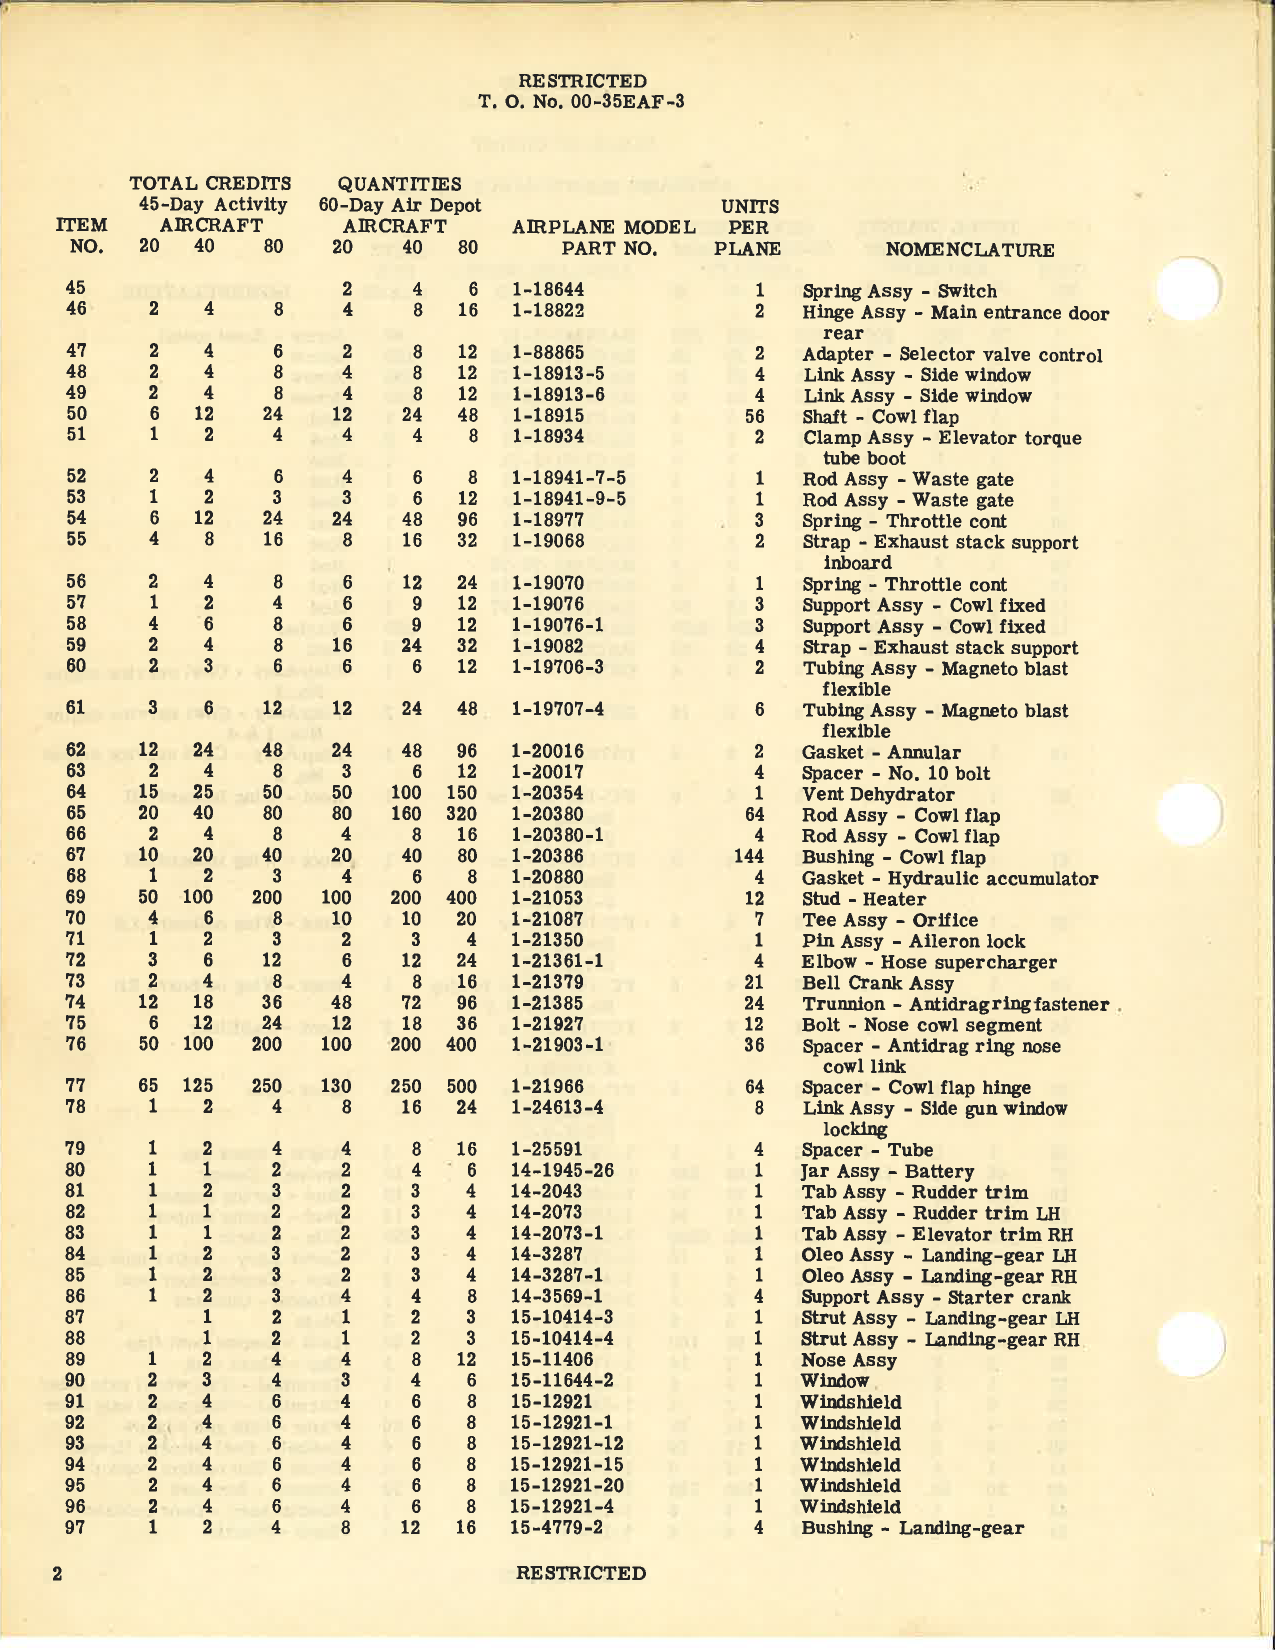 Sample page 4 from AirCorps Library document: Table of Credit - Airframe Maintenance Parts - For B-17F Series Aircraft